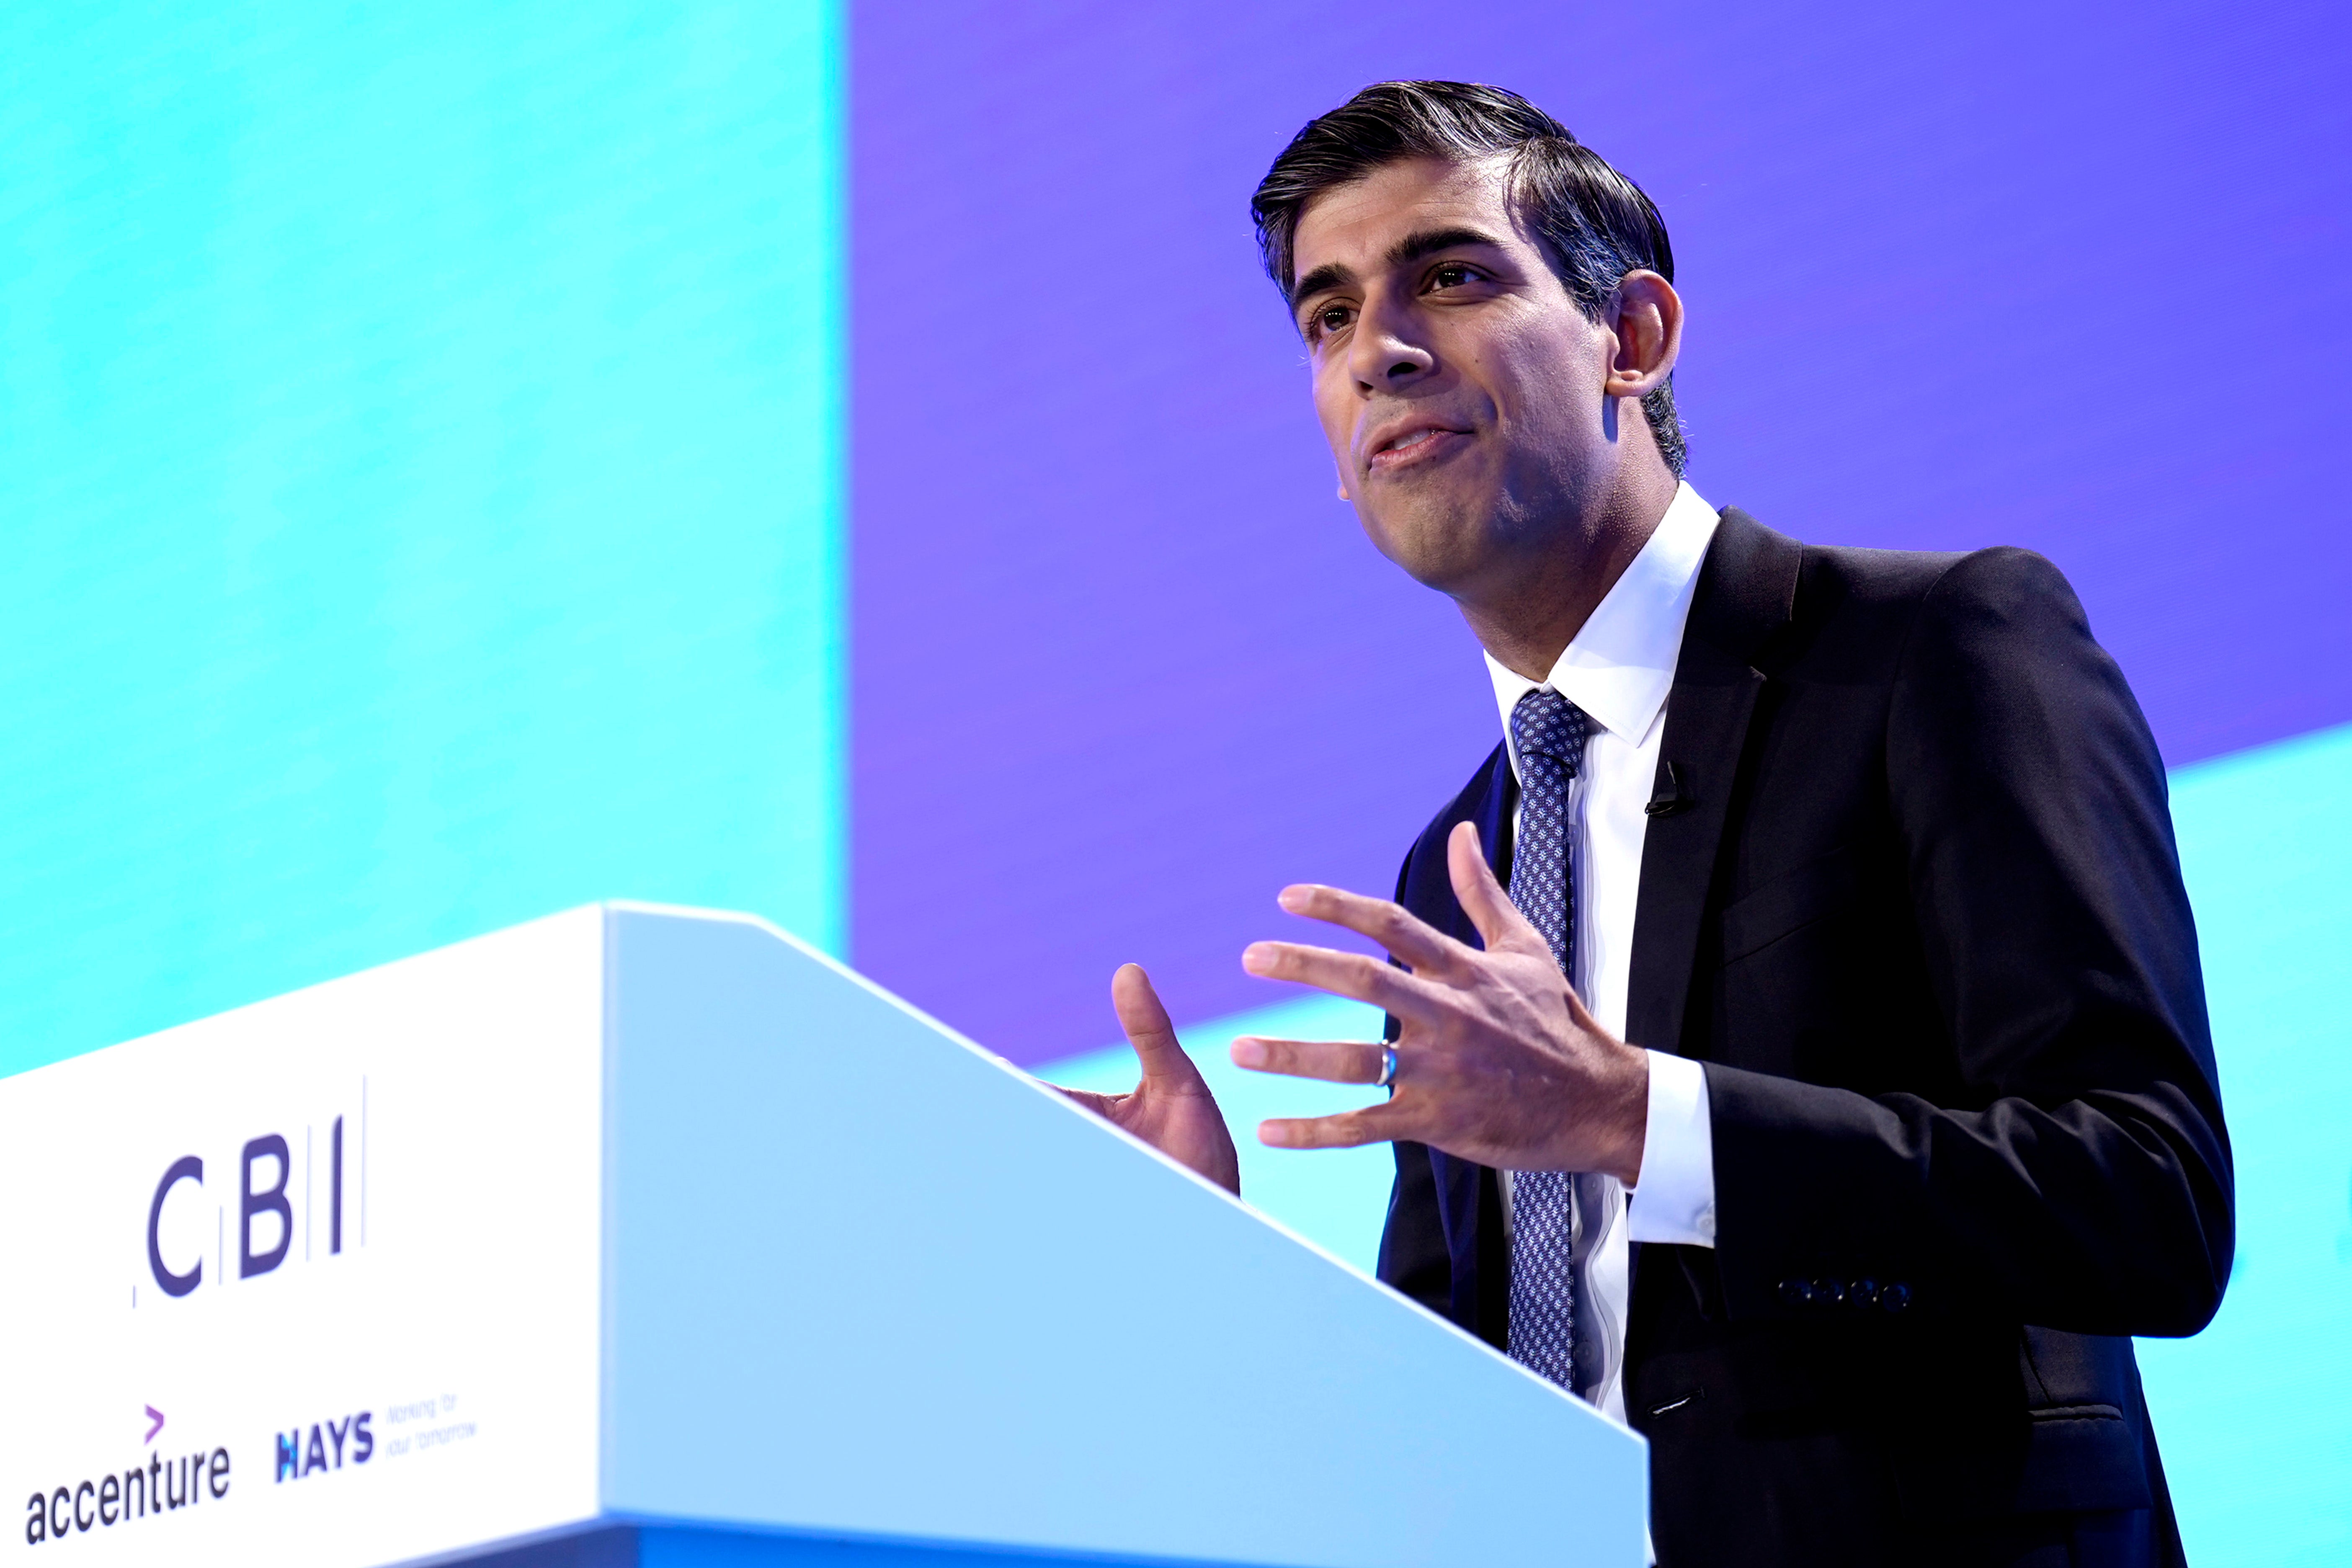 Addressing the CBI conference, Rishi Sunak dismissed the idea of a closer, Swiss-style arrangement with the EU